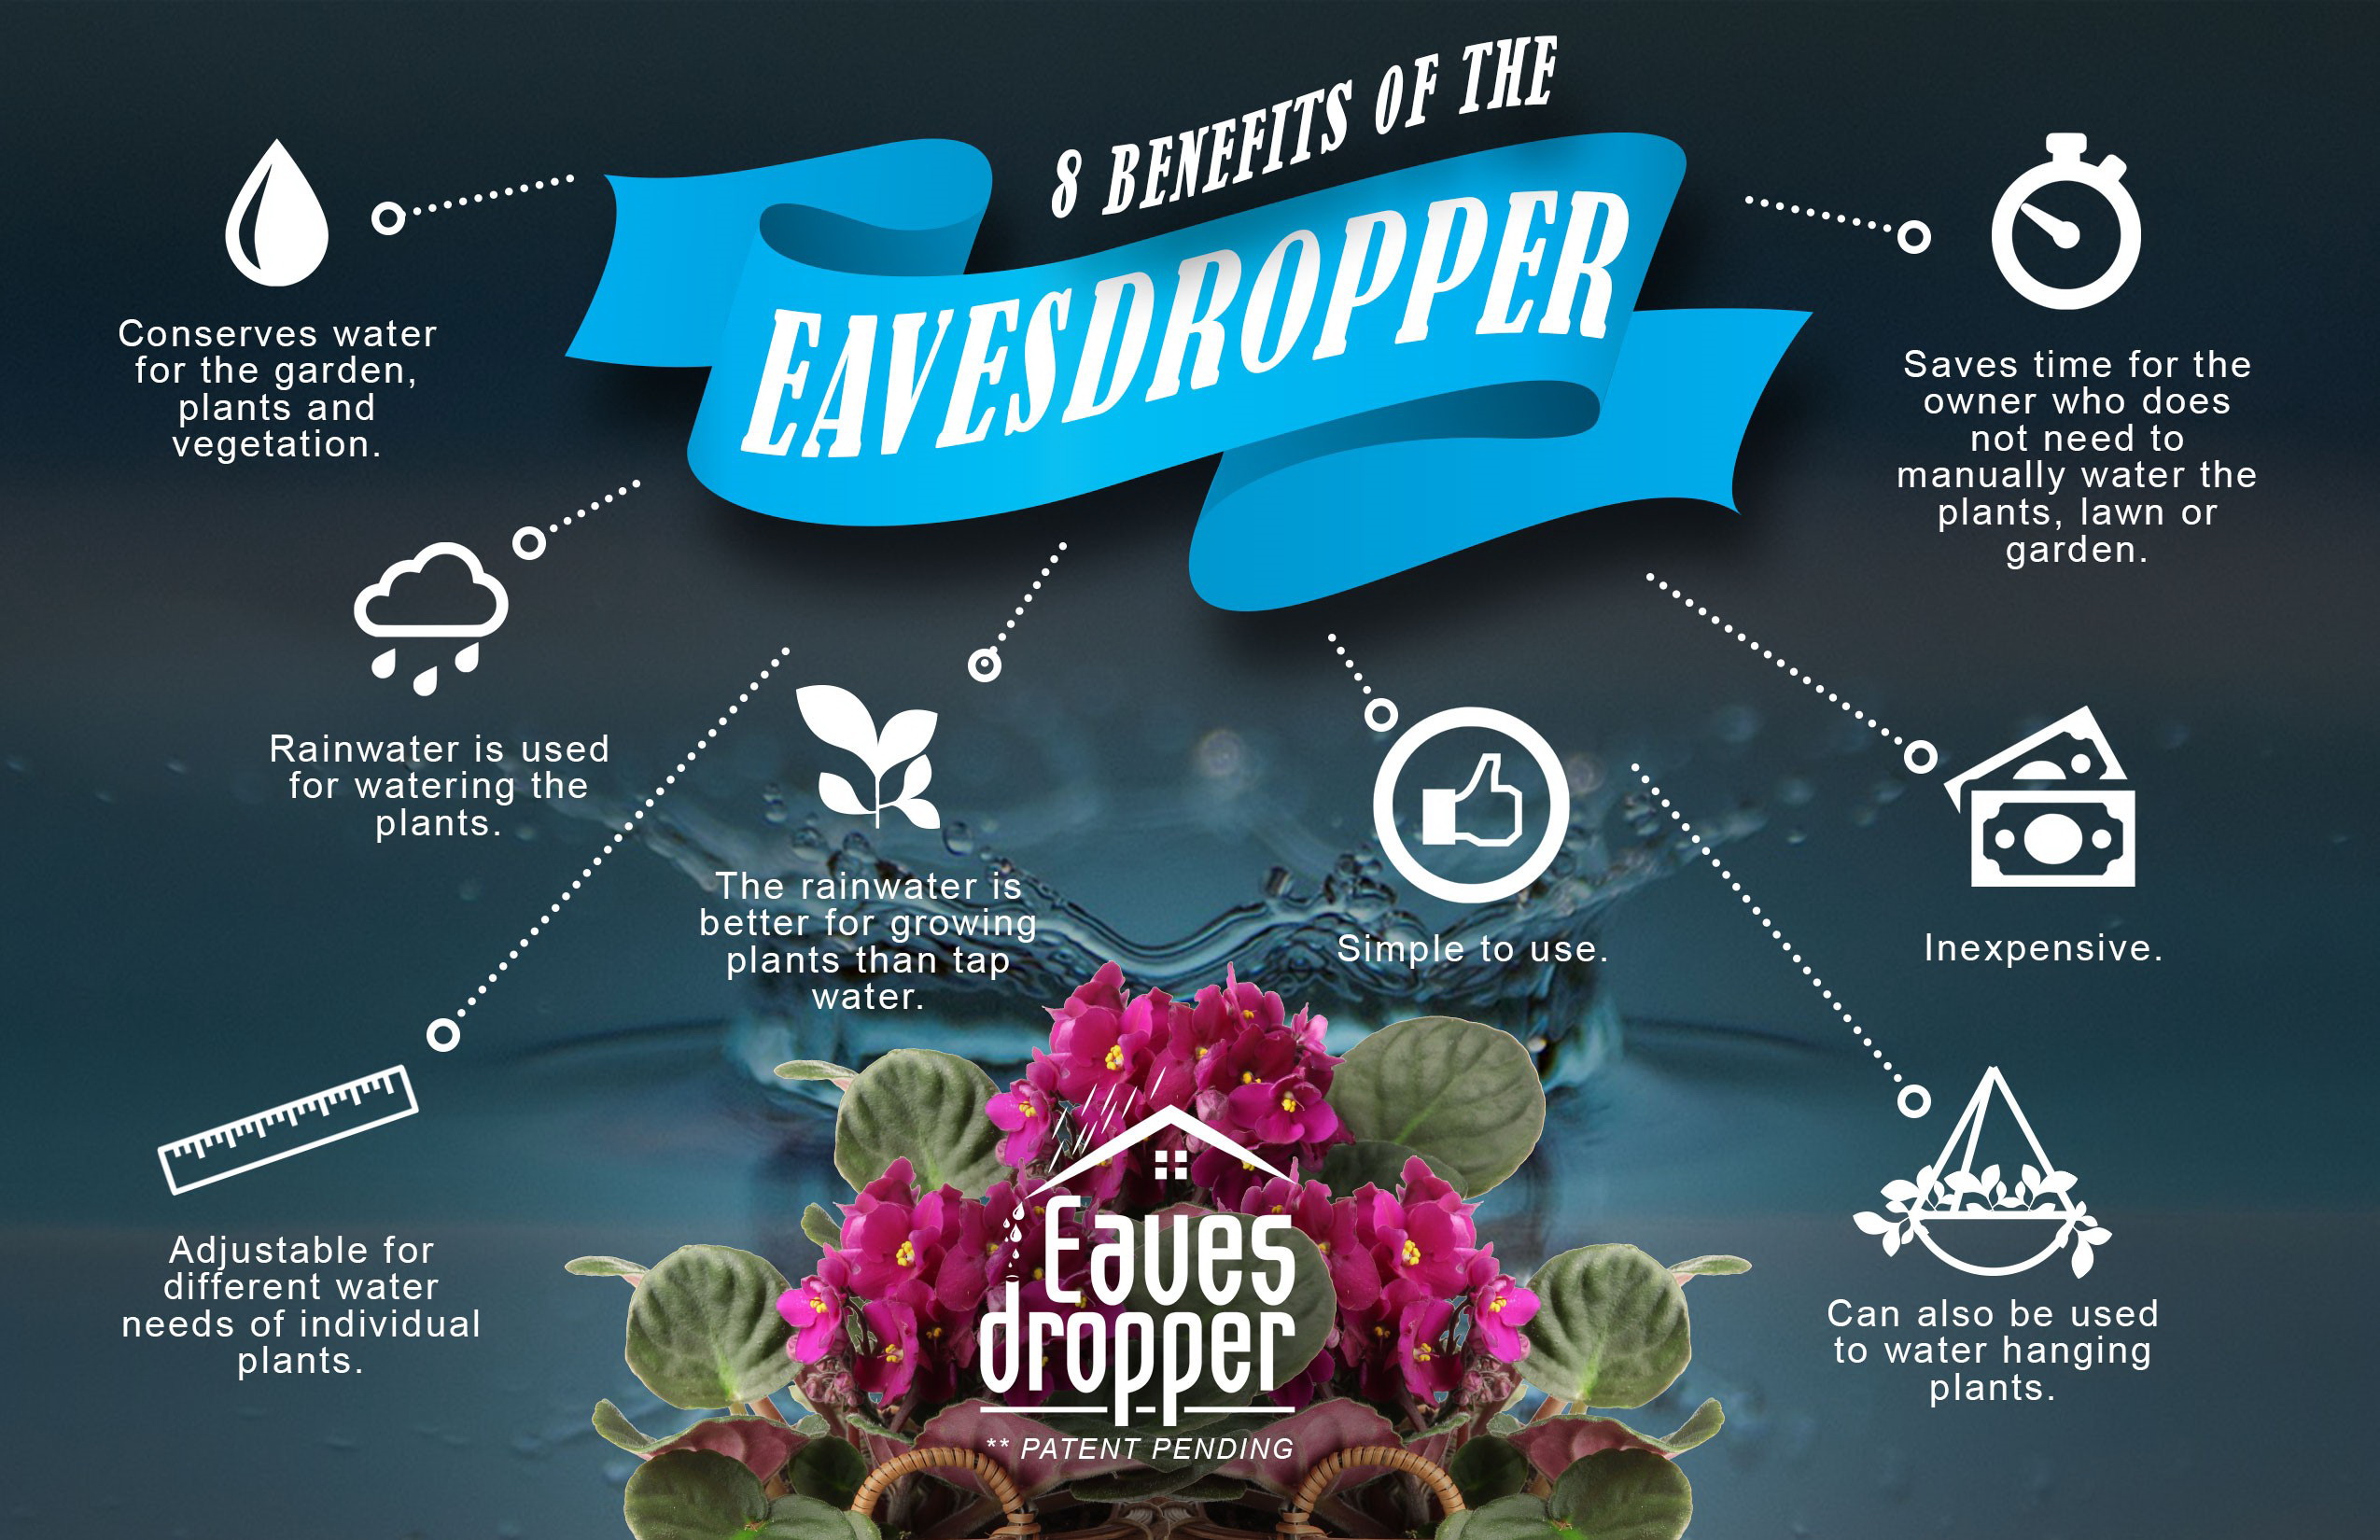 The Eavesdropper is inexpensive, easier to install and utilize than irrigation systems.